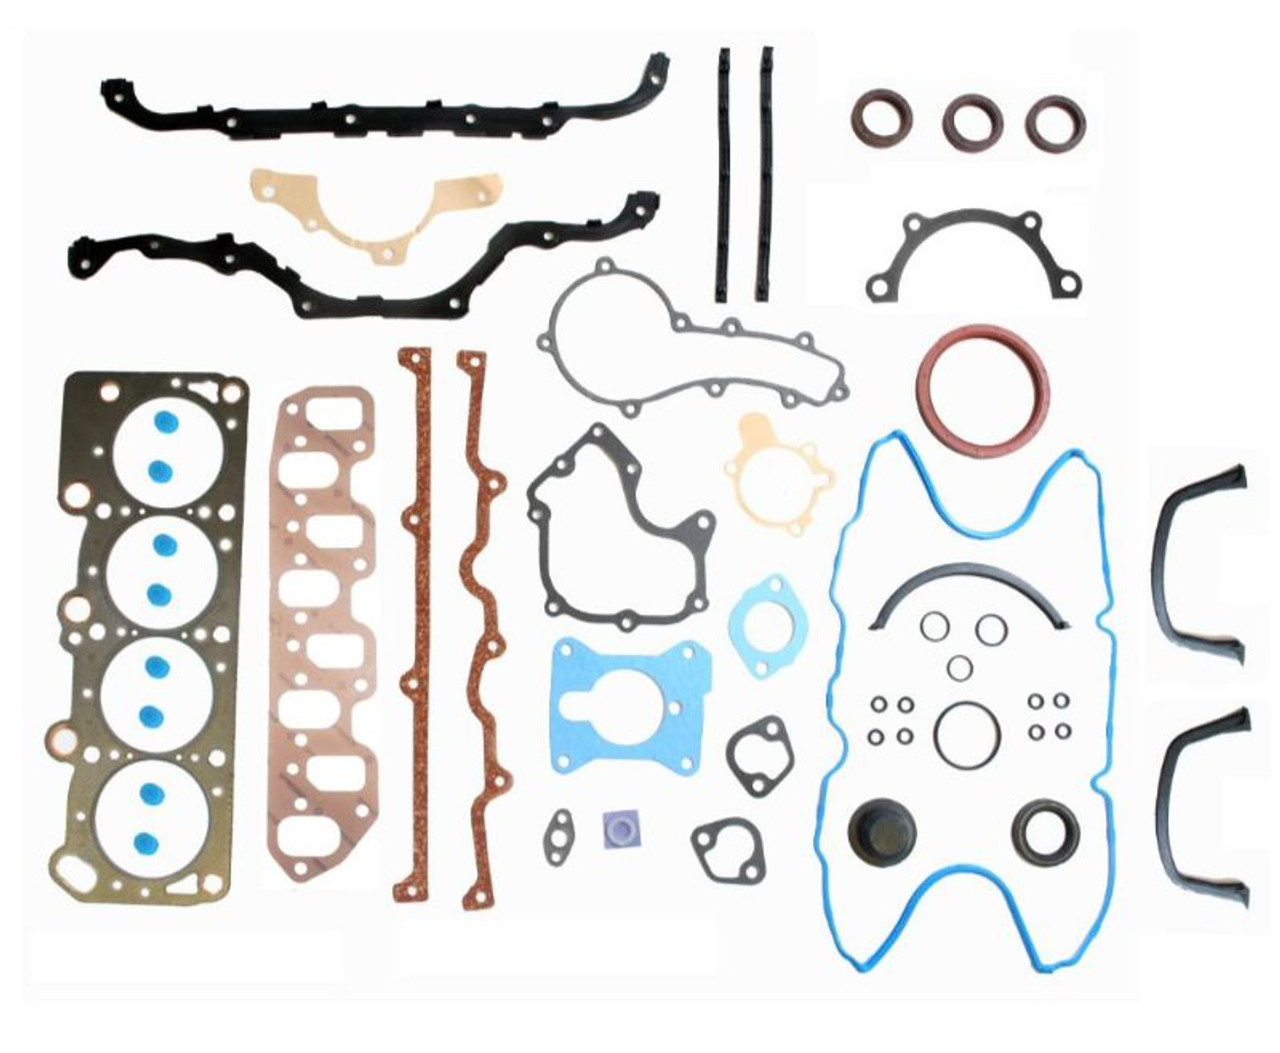 1989 Plymouth Voyager 2.5L Engine Gasket Set CR2.5L-17 -36